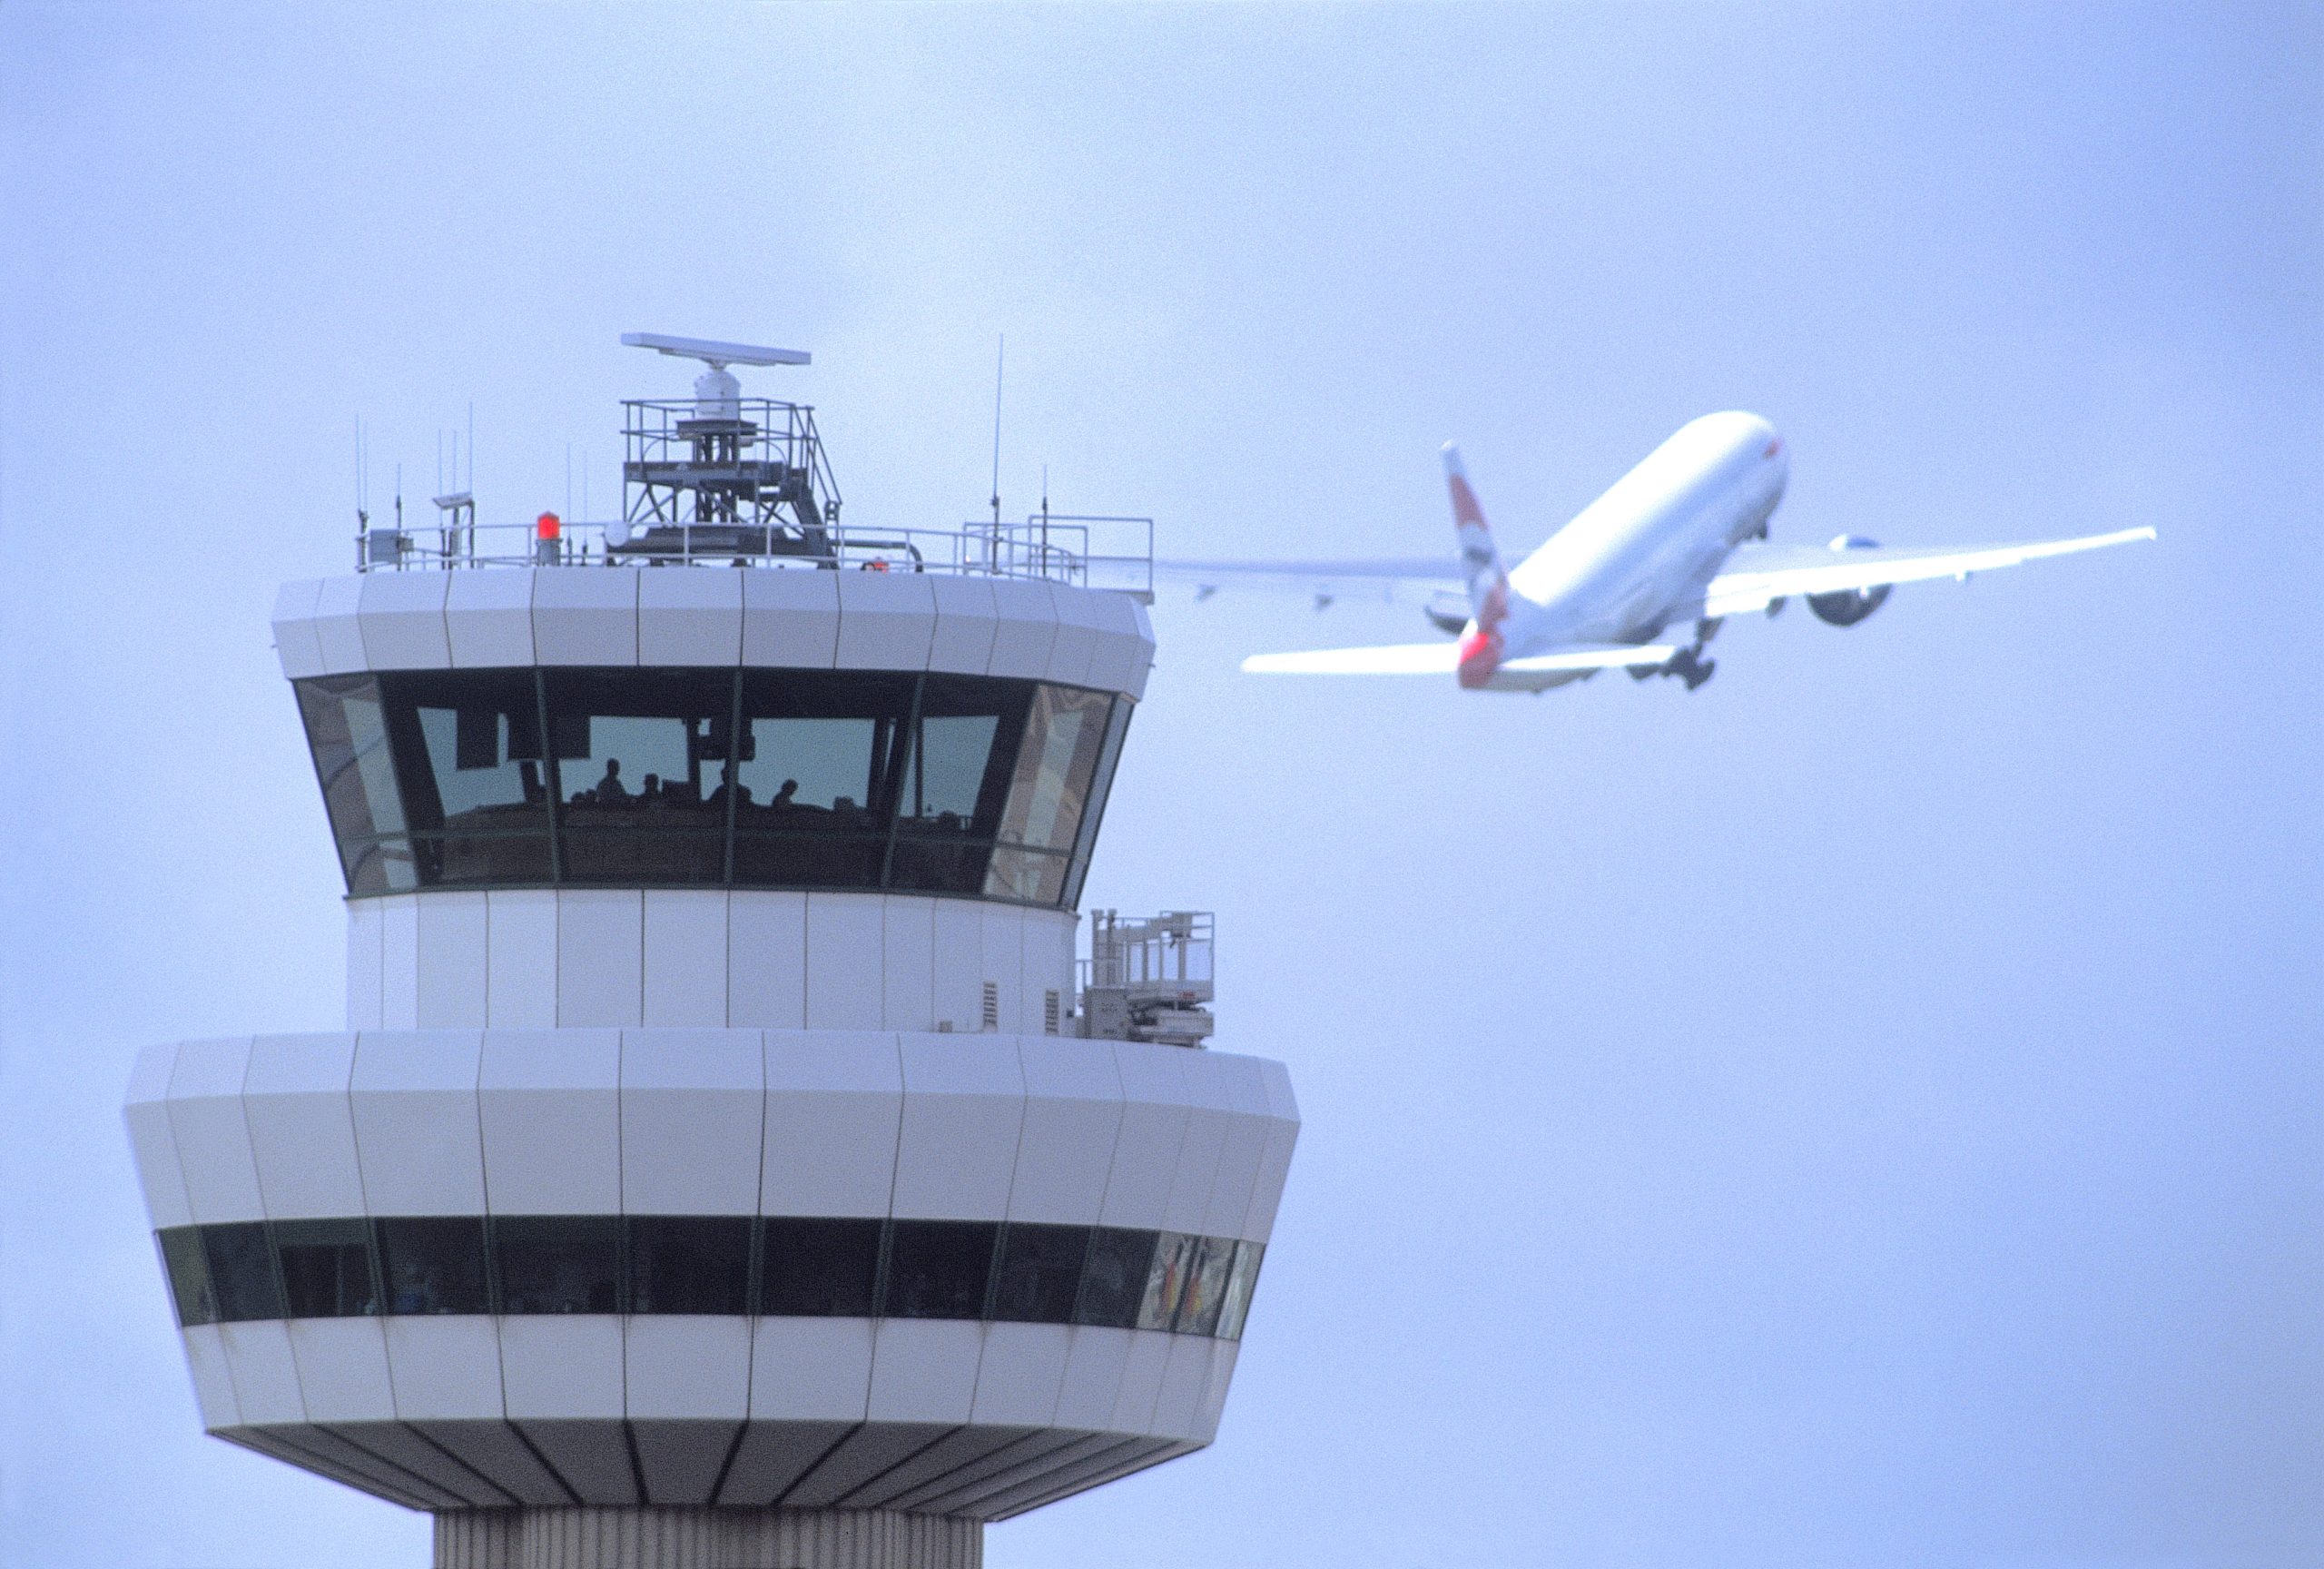 control tower with aircraft 11111 scaled - Travel Radar - Aviation News